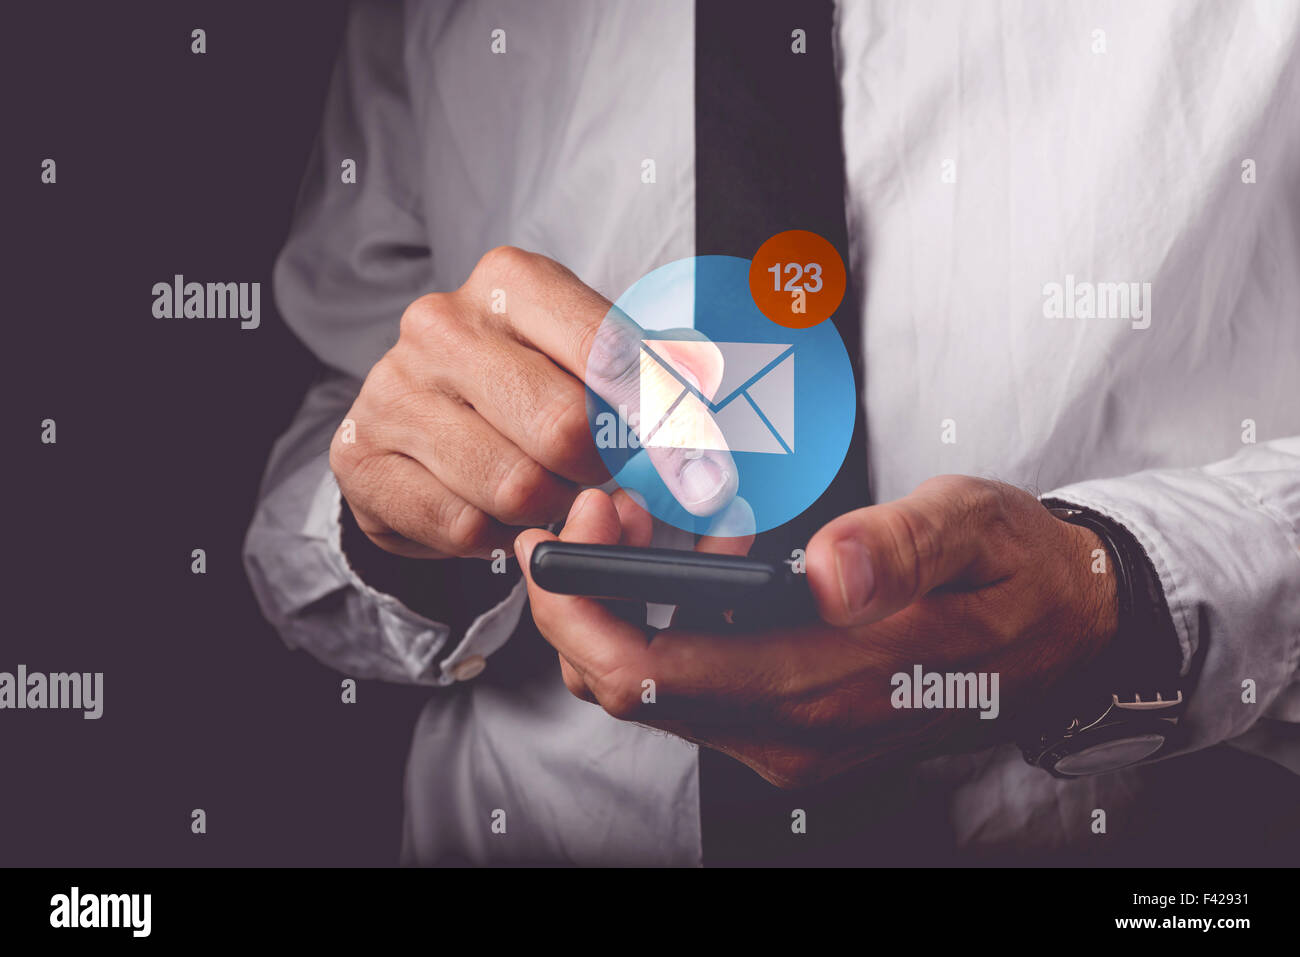 Businessman viewing e-mail messages on mobile smart phone, finger on touch screen of wireless device pushing application icon, r Stock Photo